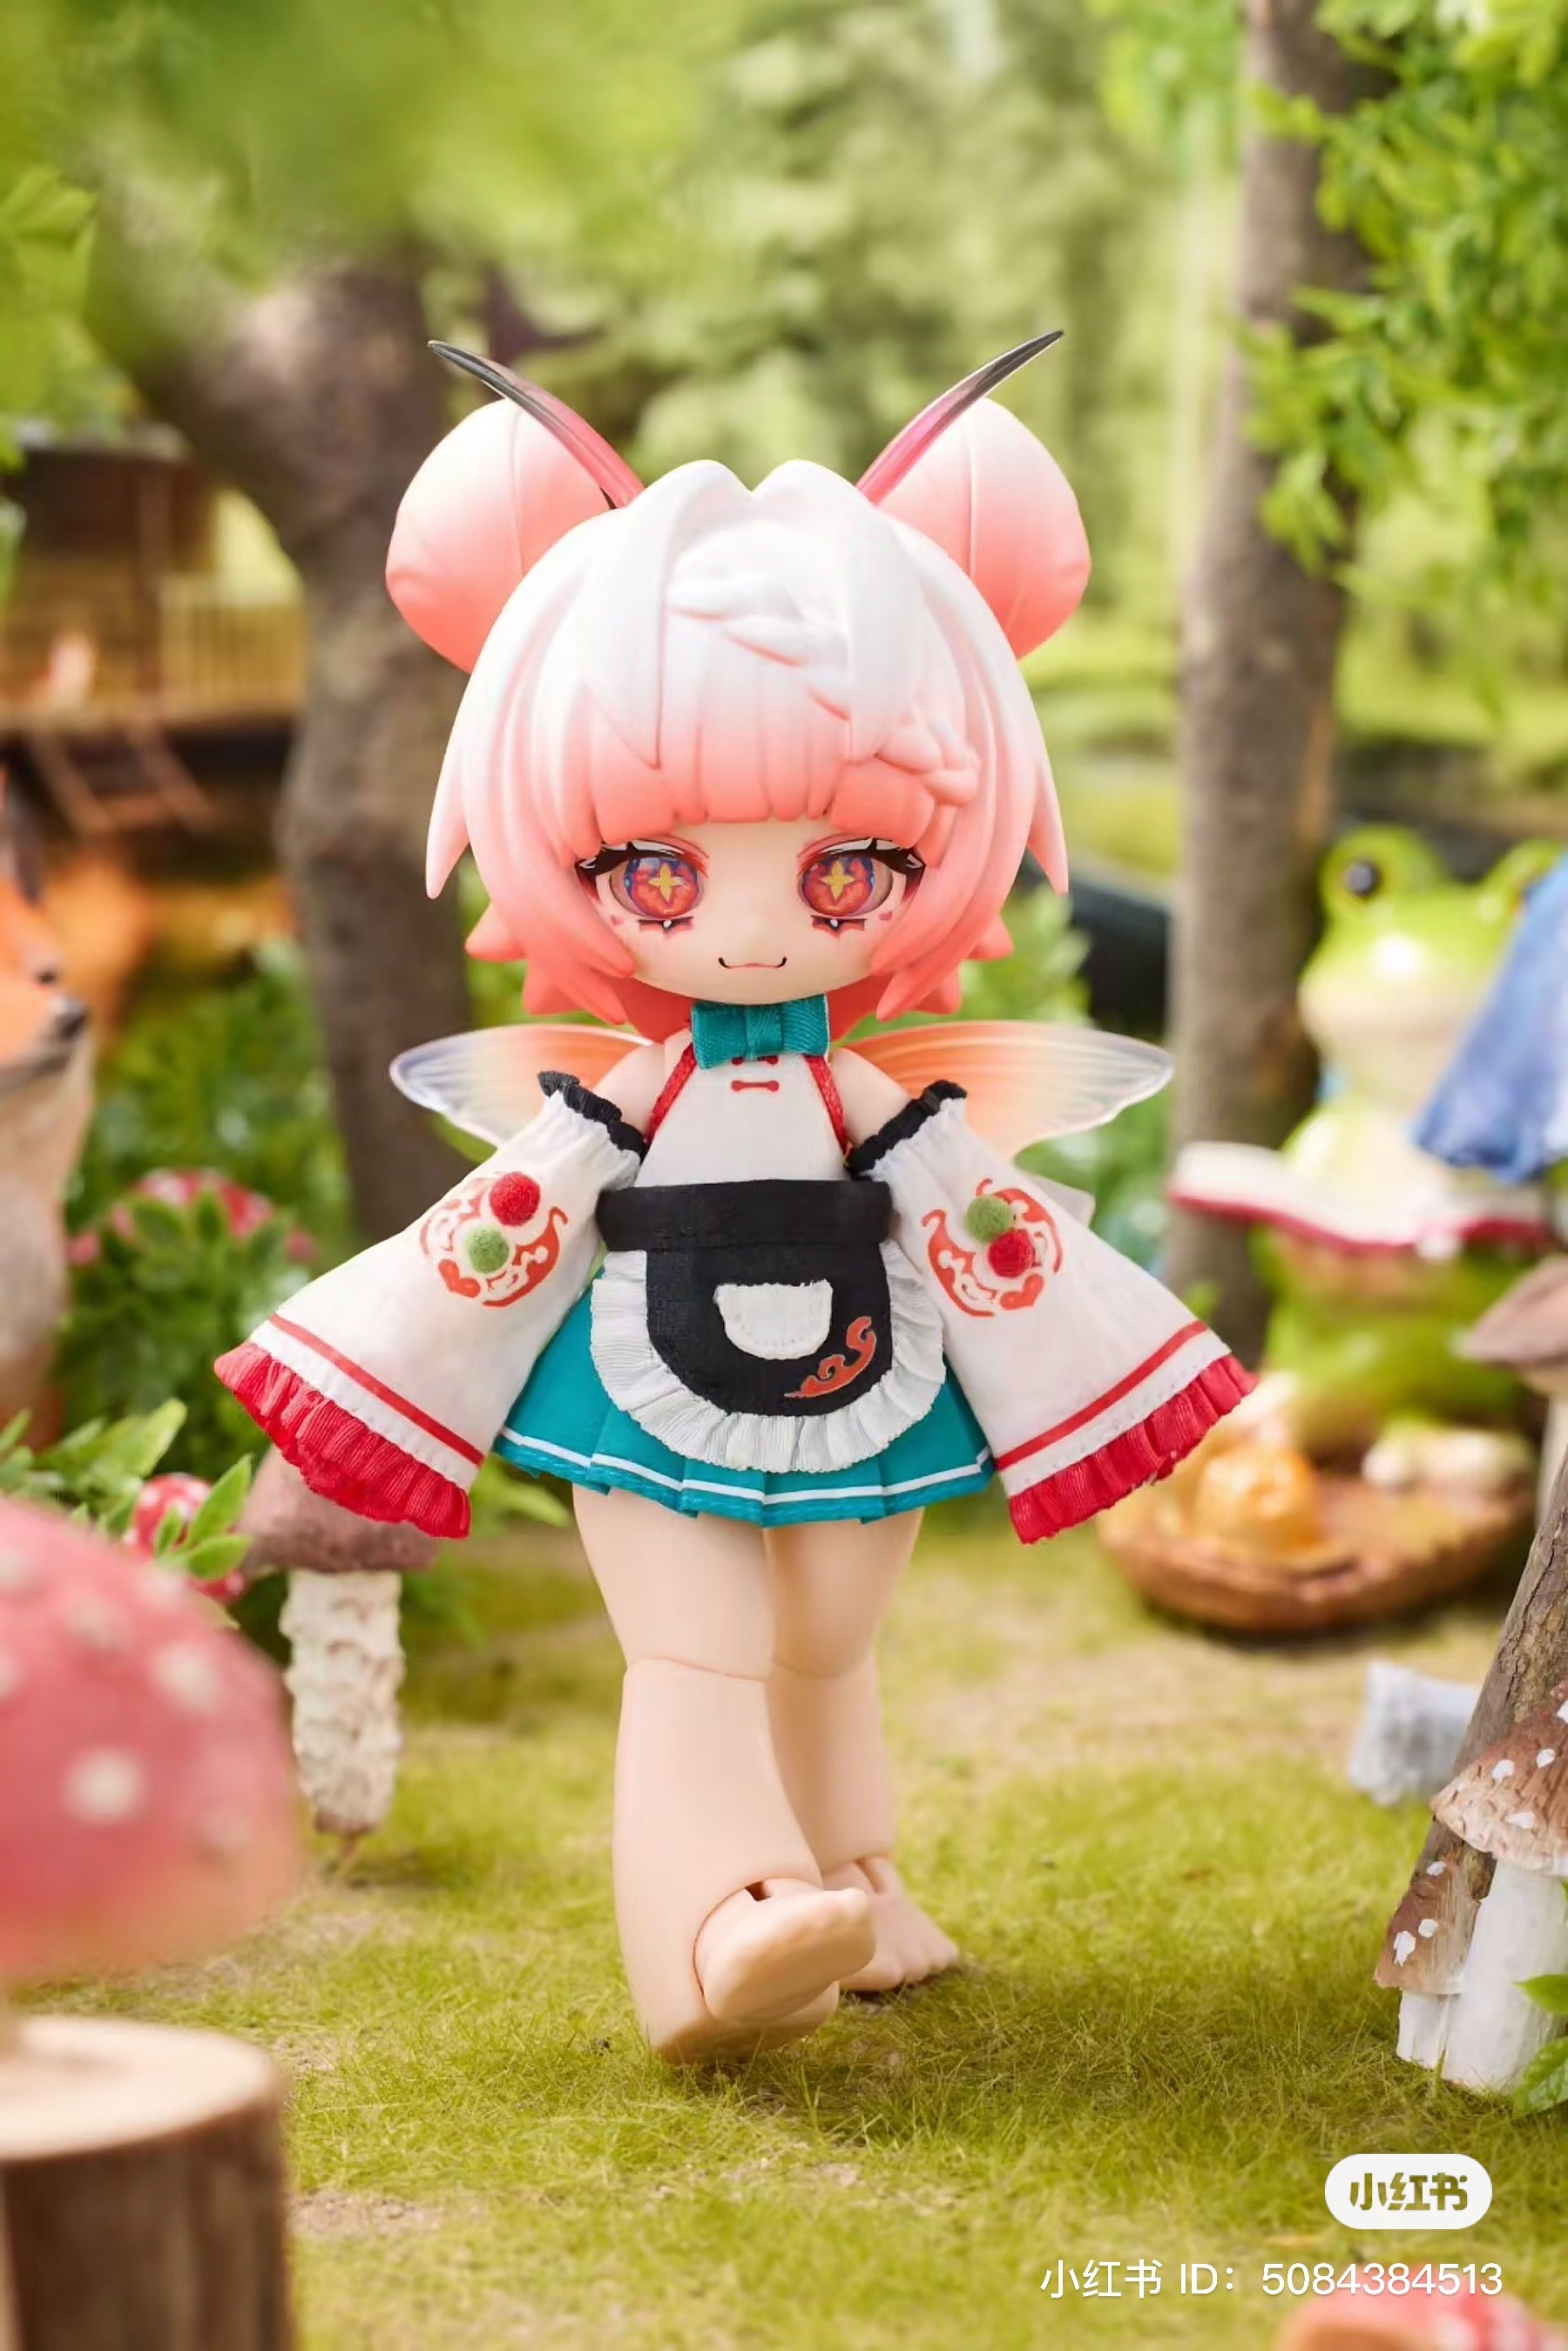 Kukaka Insect Cafe BJD Blind Box Series doll with wings, close-ups, and details.